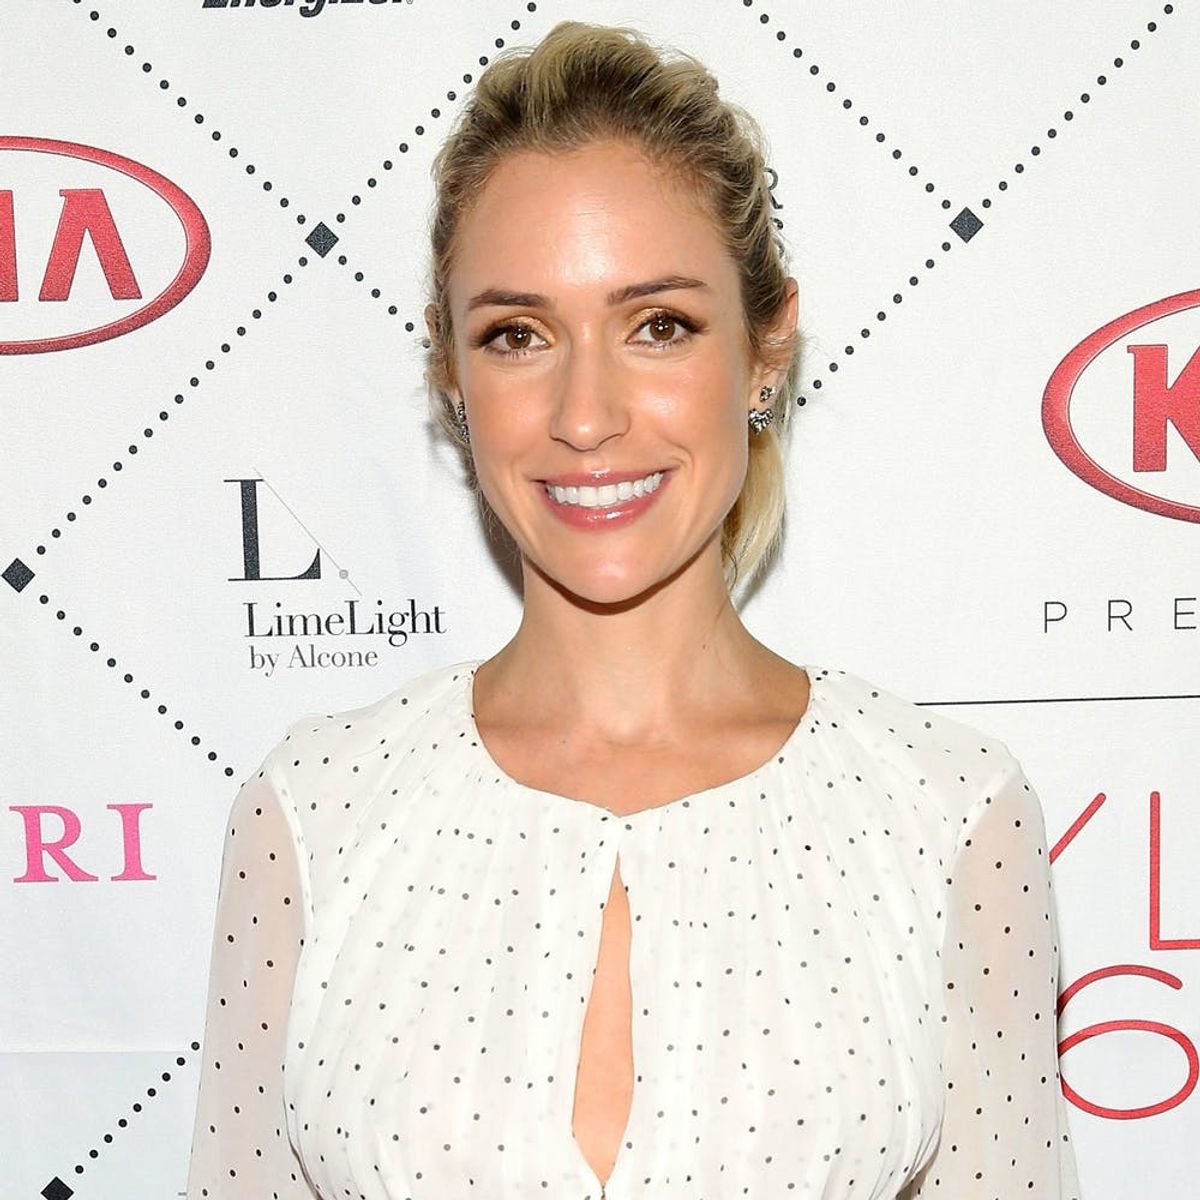 This Is What You Can Expect from Kristin Cavallari’s Upcoming Cookbook